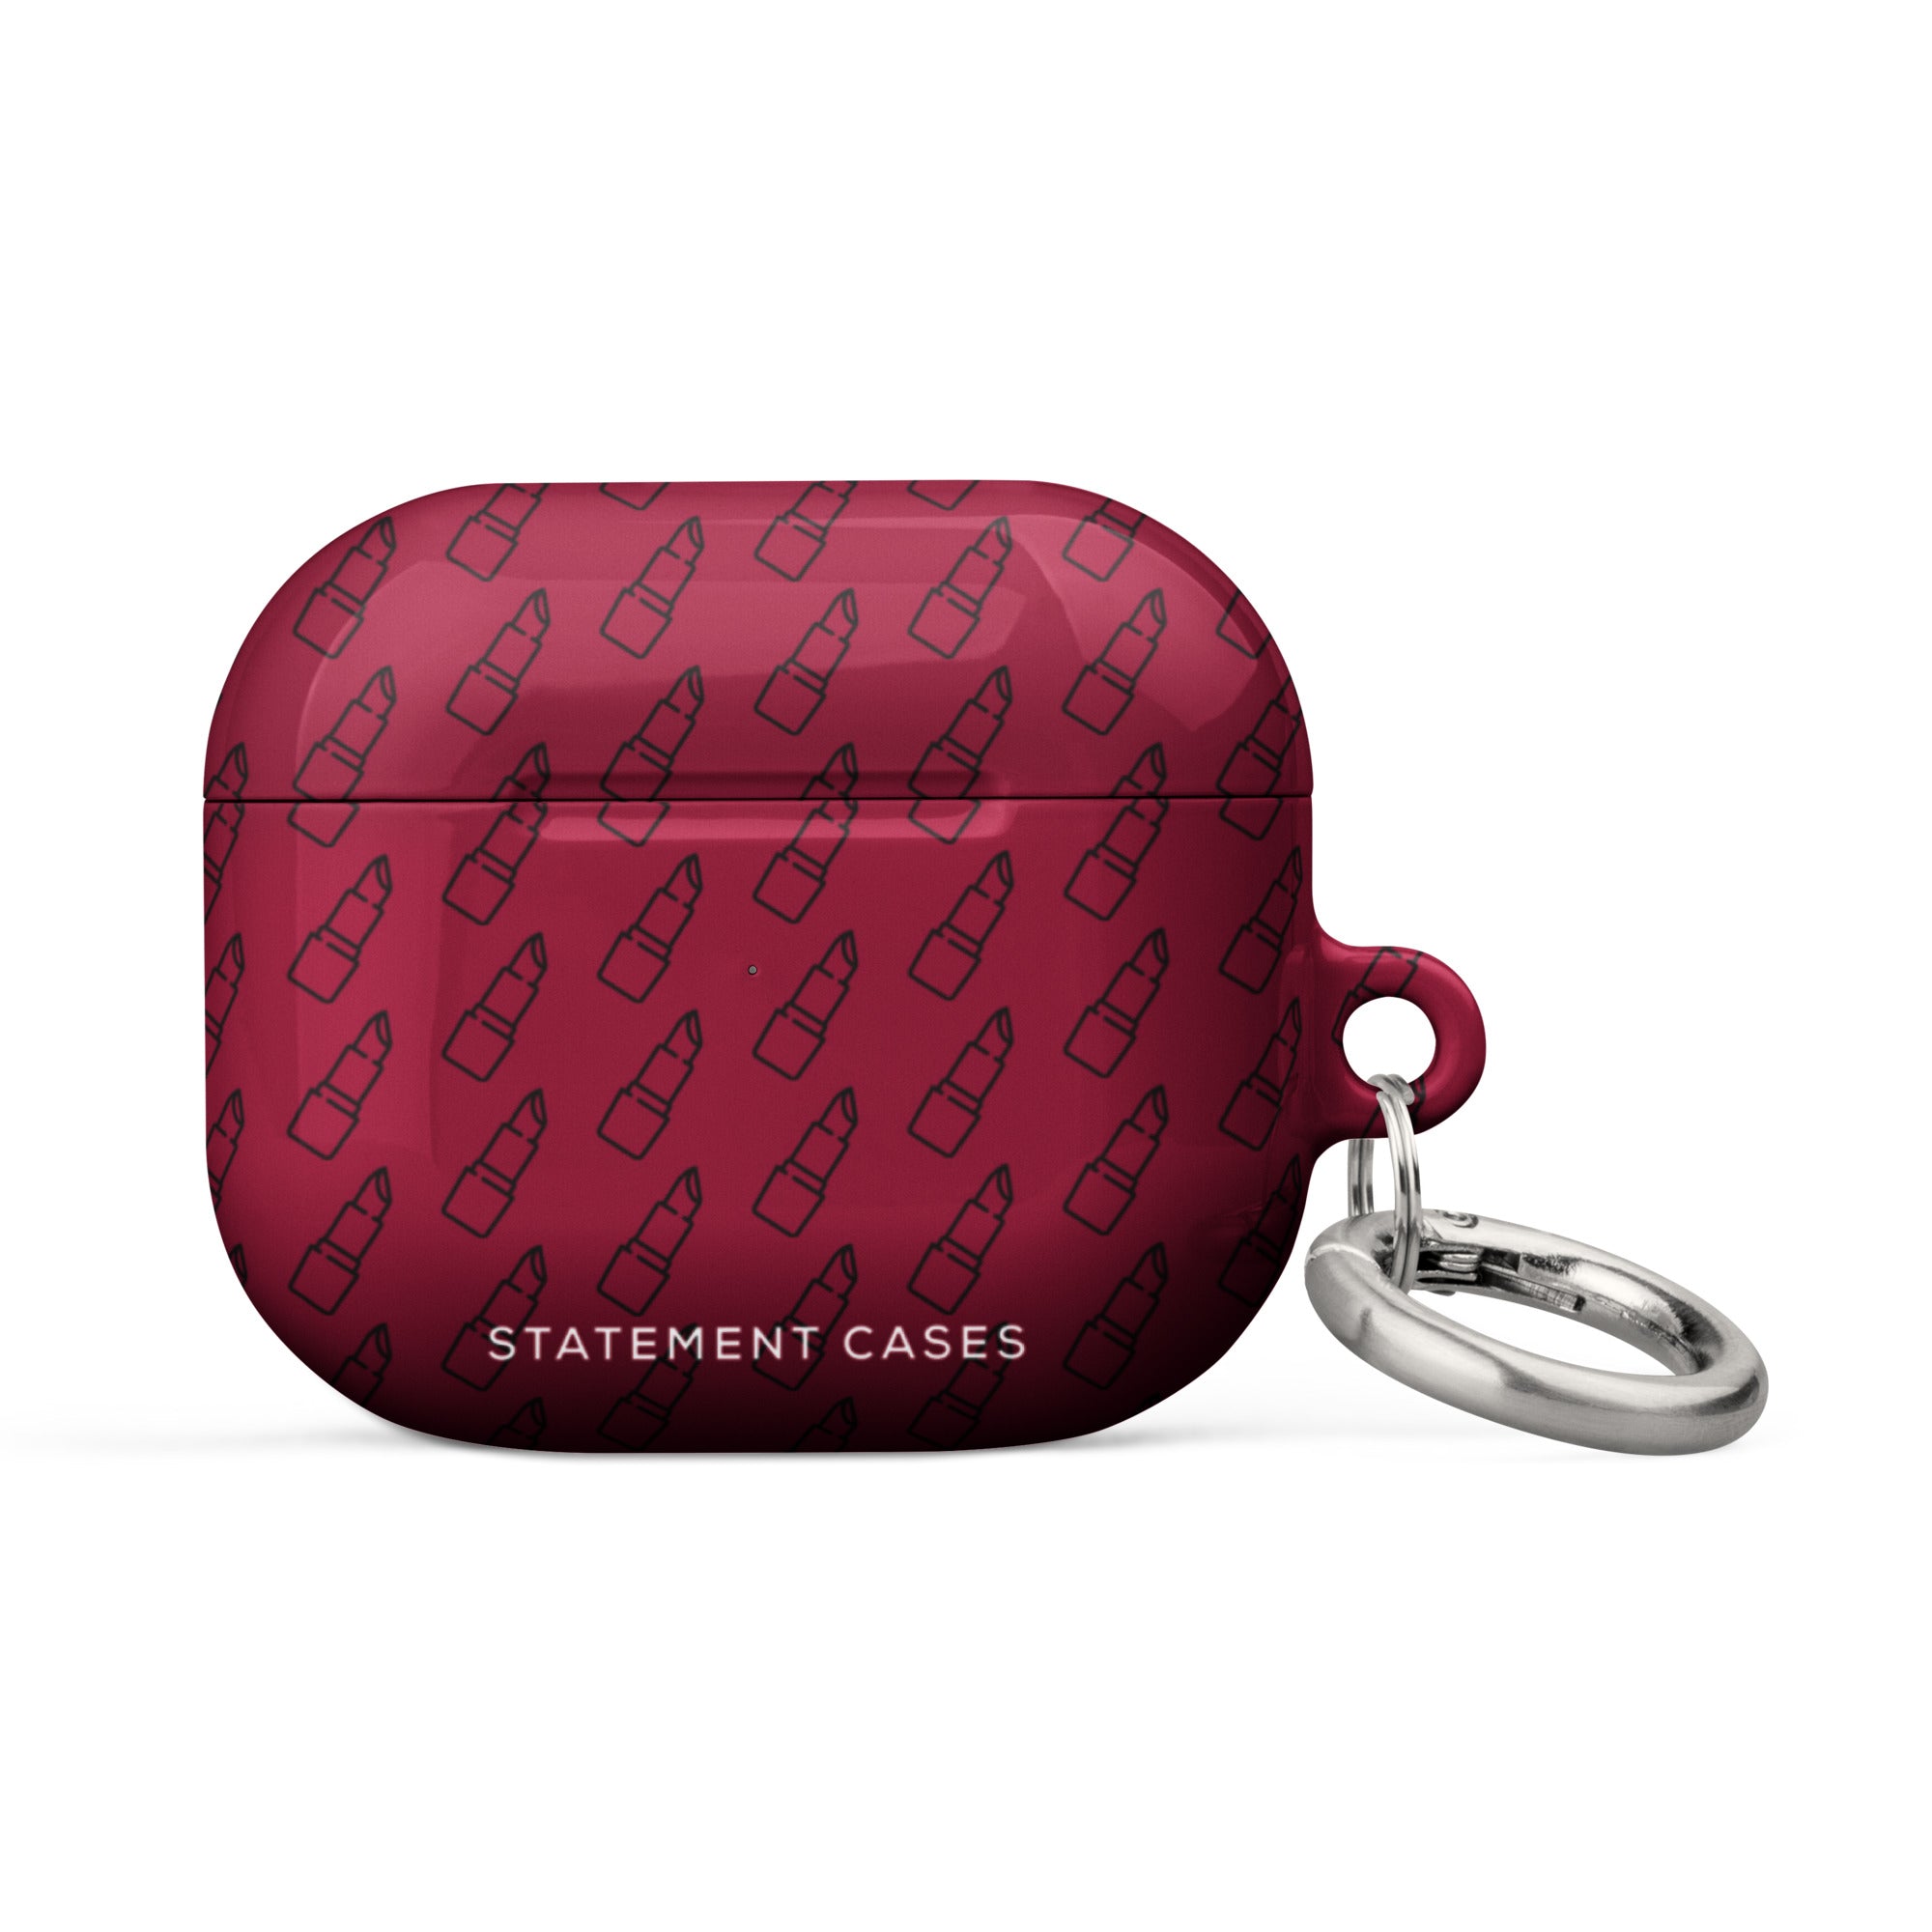 A Rockstar Red for AirPods Gen 3 with a repeating pattern of lipstick icons. The case features an impact-absorbing design and a keychain attachment with a metal carabiner, making it easy to attach to other items. The text "Statement Cases" is written at the bottom front of the case.